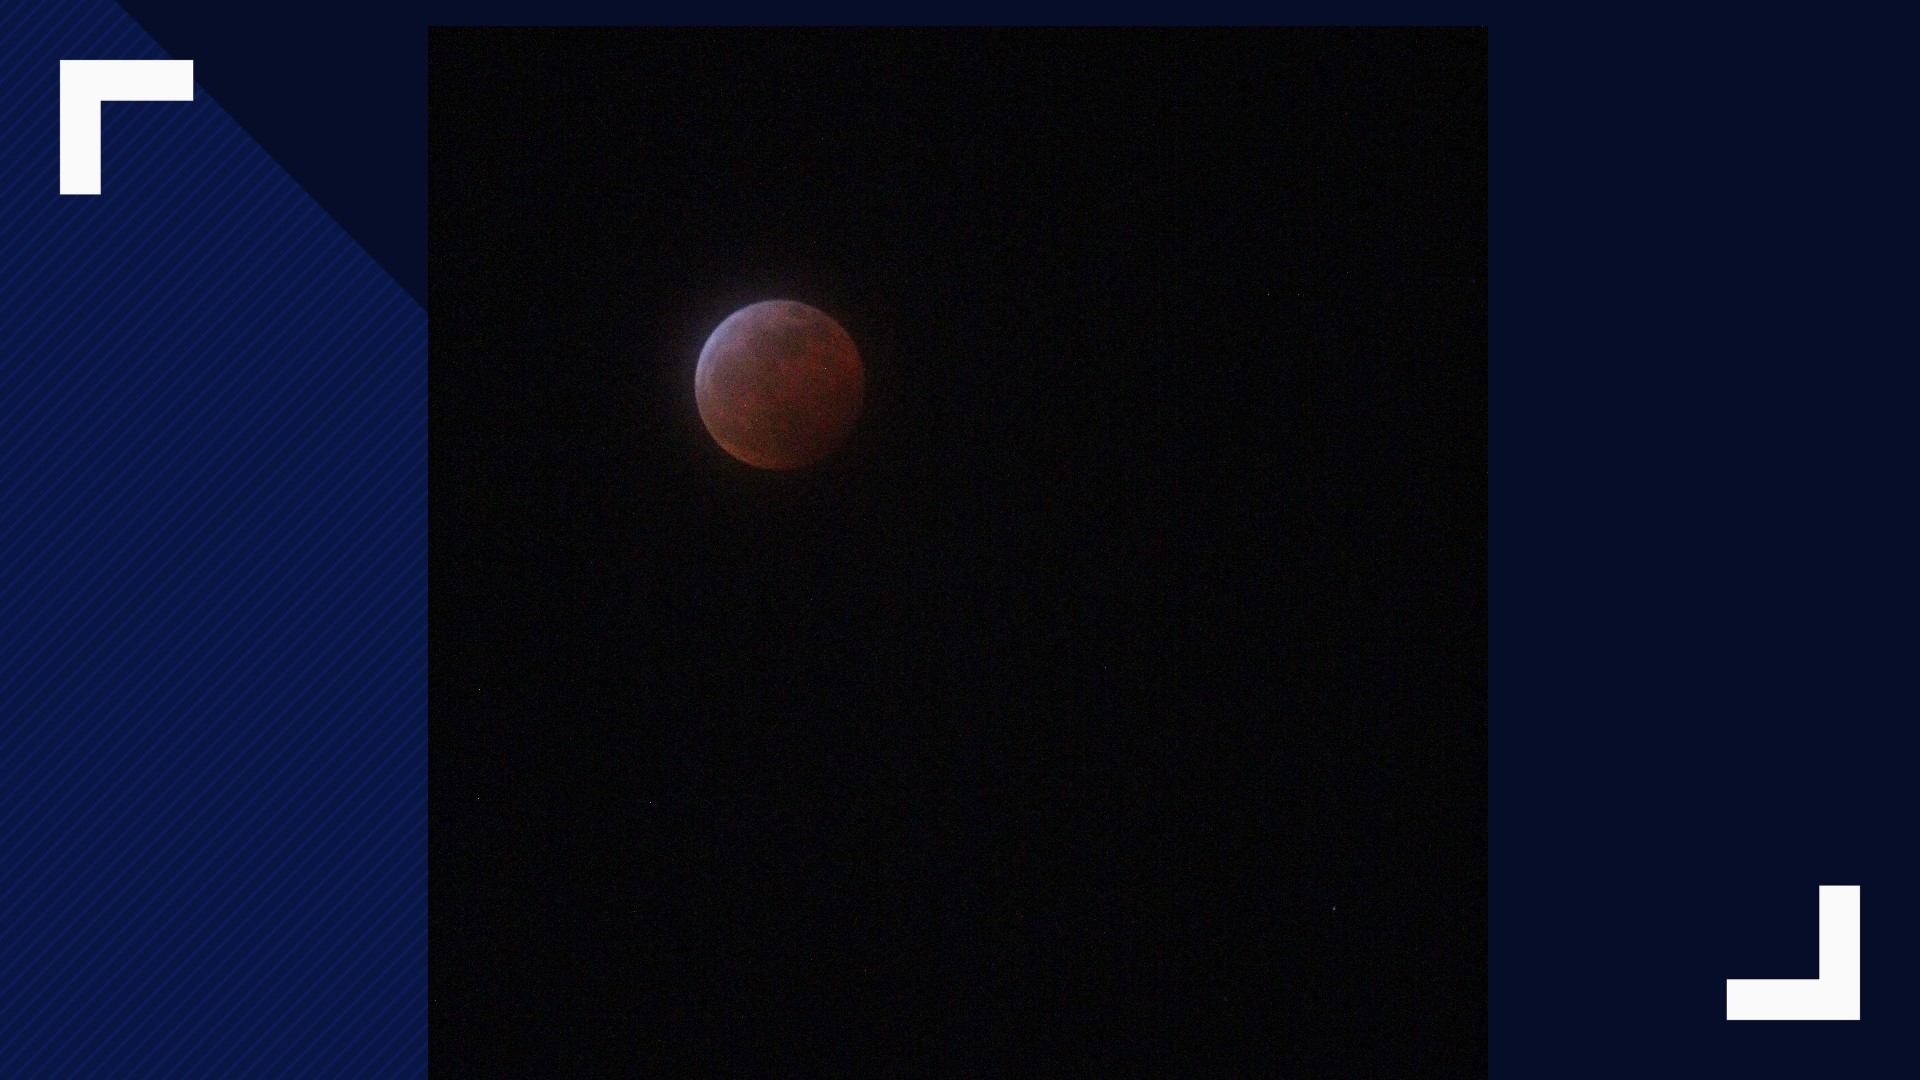 Multi-Platform Producer Nick Tarrant shot a picture of the super blood wolf moon on January 21.